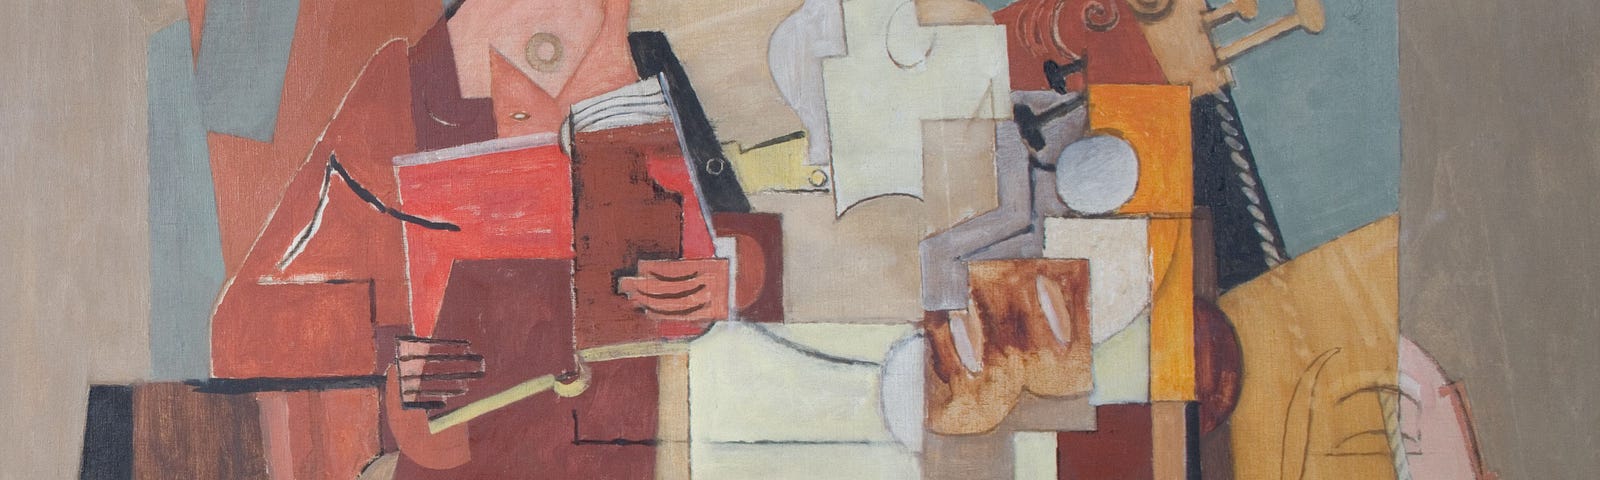 A person reading at a desk. Cubistic style of painting